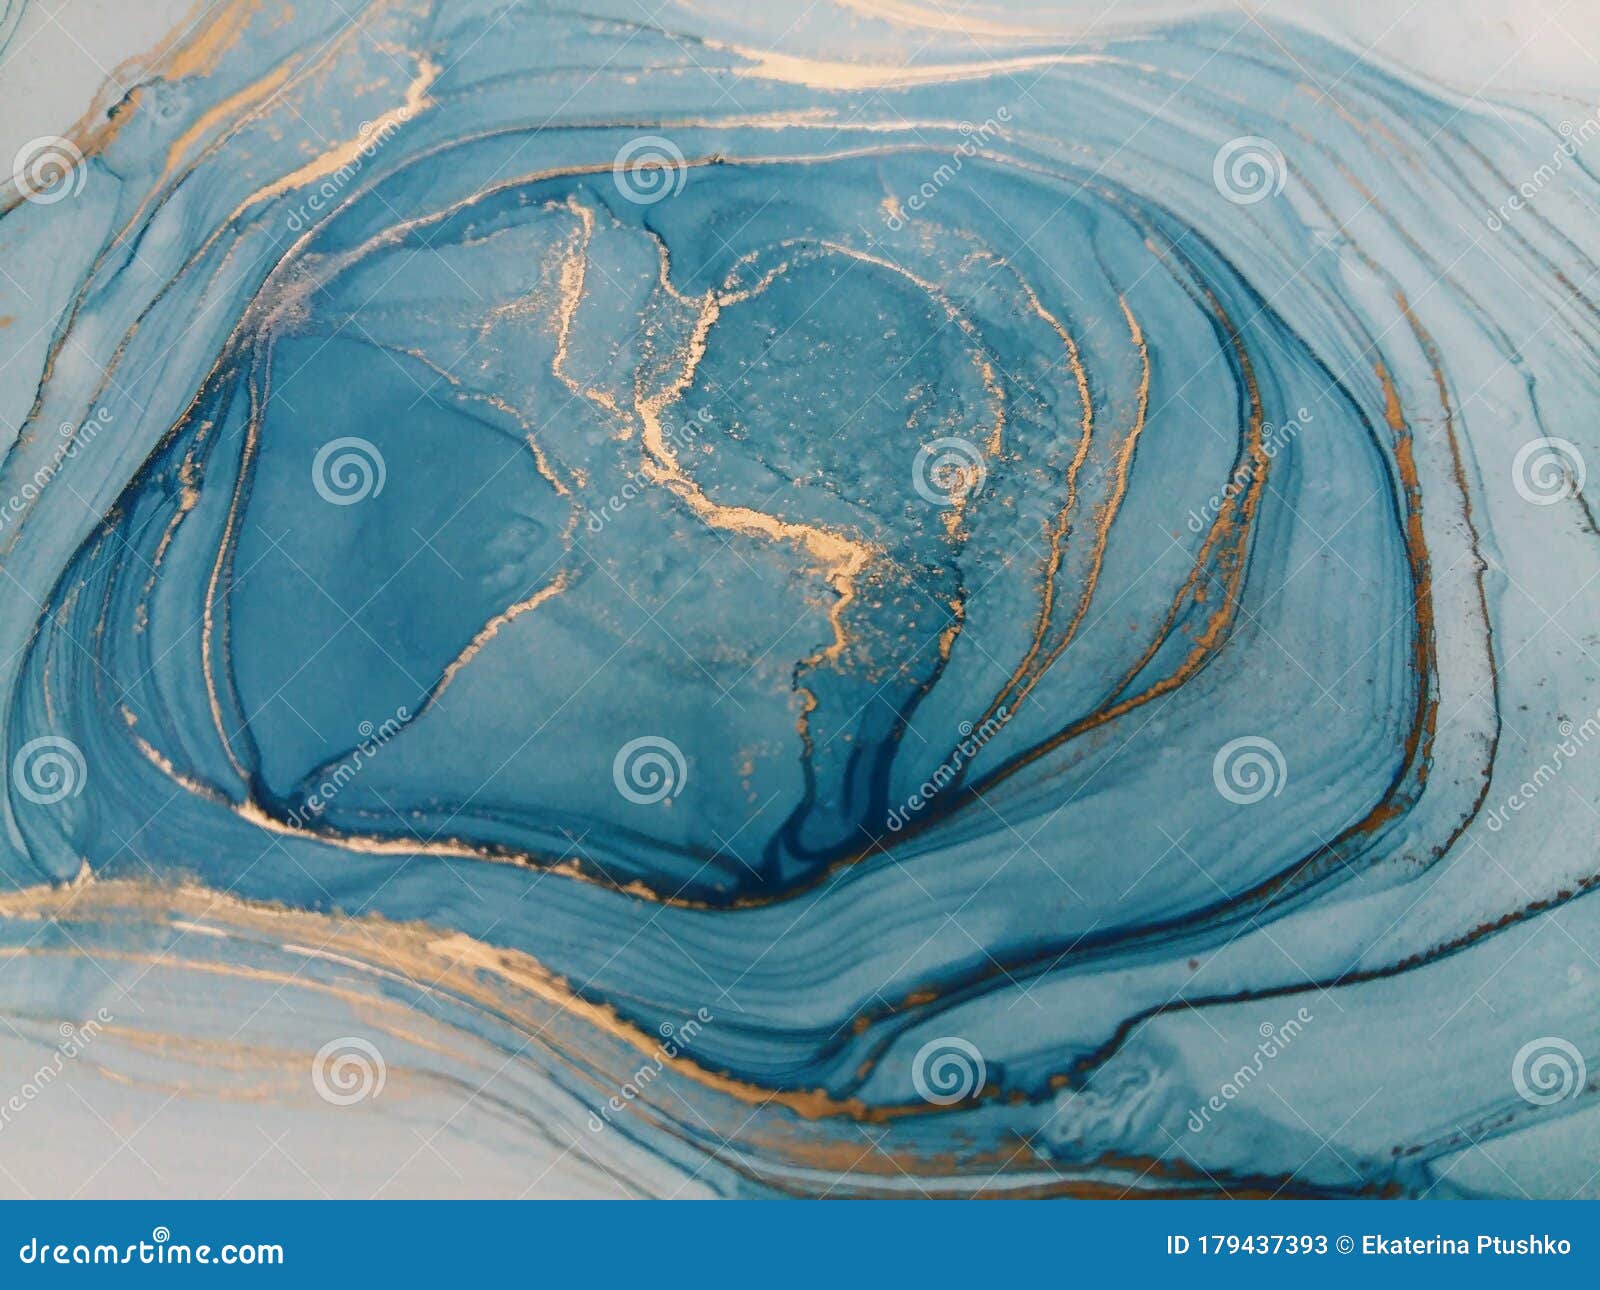 luxury abstract fluid art painting background alcohol ink technique blue and gold. swirls of shiny gold edges.